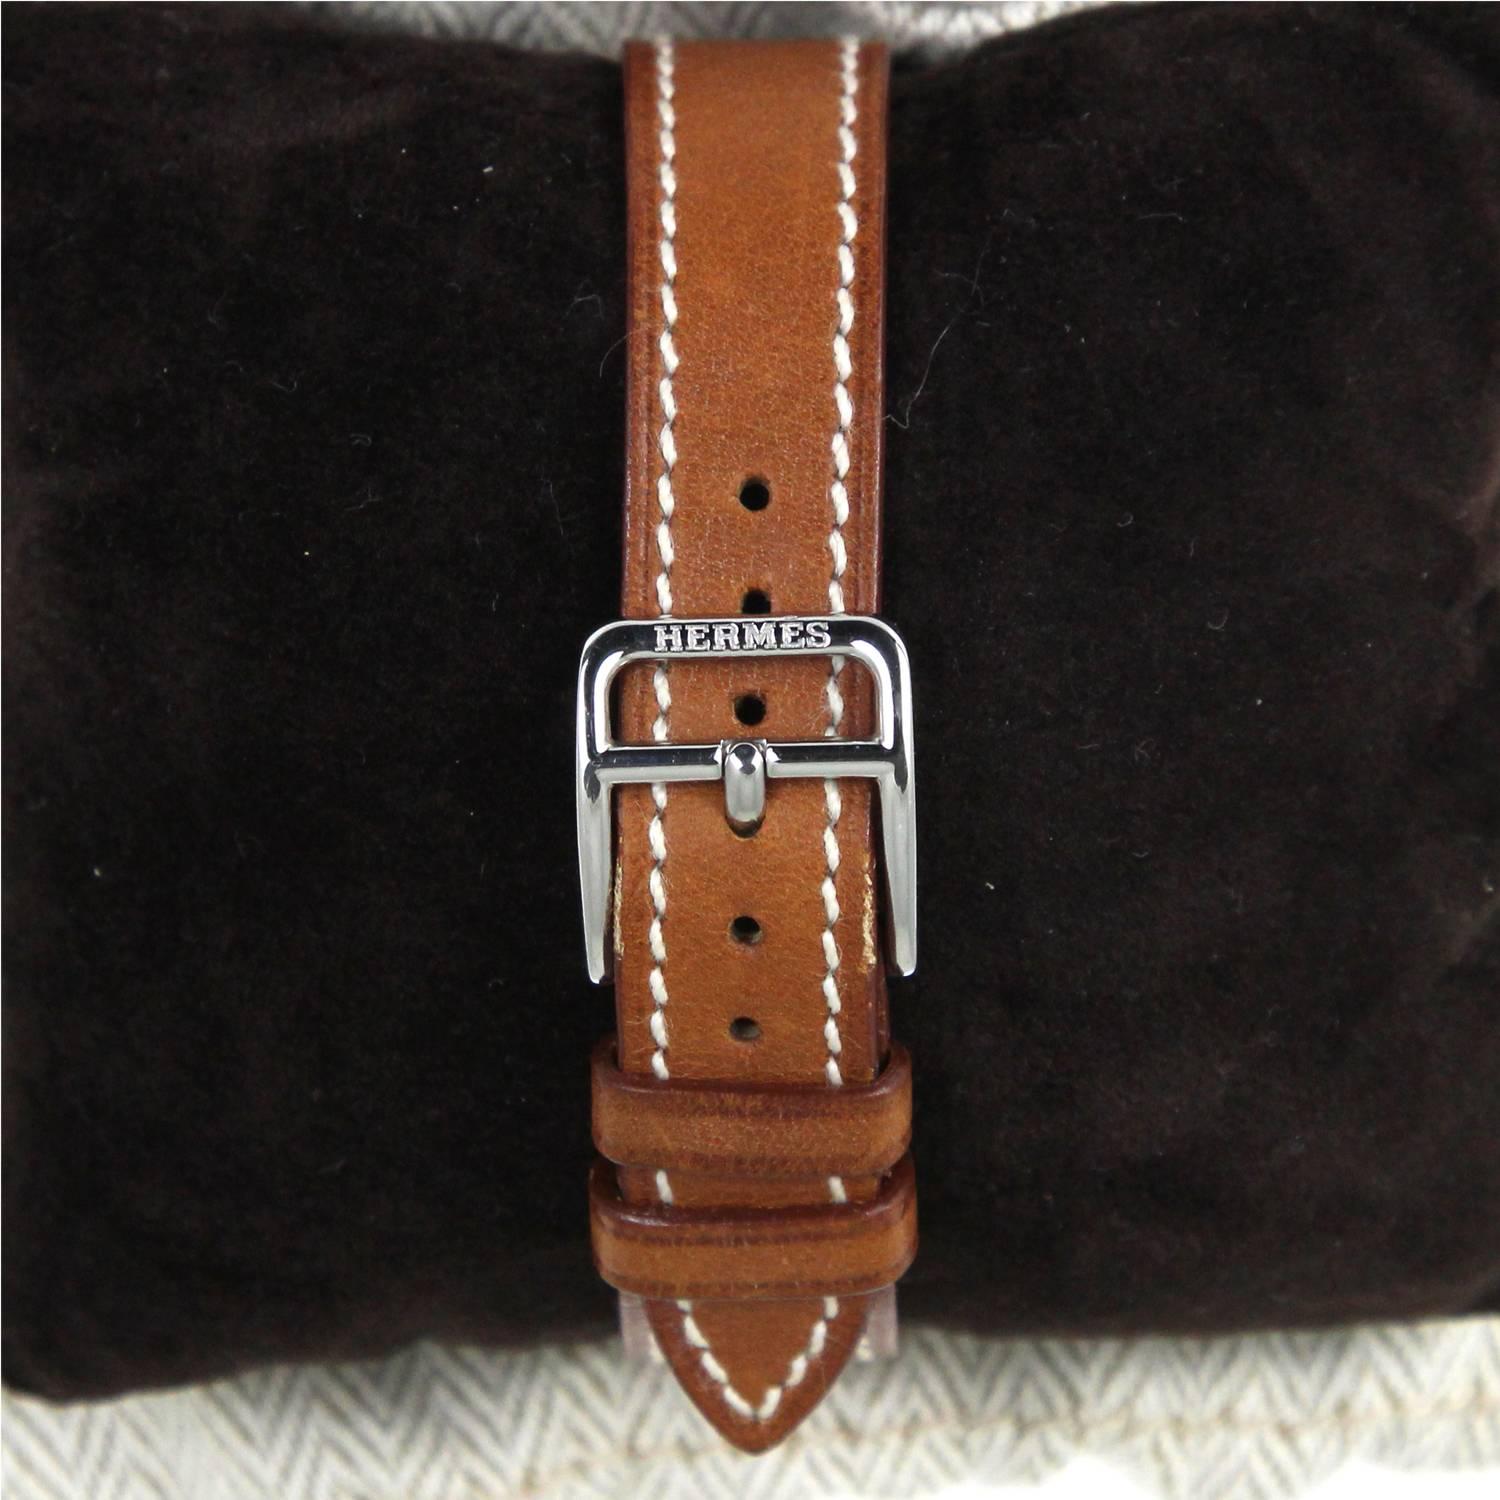 Hermès Heure H Ronde PM watch, with a brown leather watchband. According to the code: [J] the item was produced in 2006. The item is in good conditions, it shows some light signs of utilization on the watchband (see the pictures).  
Length of